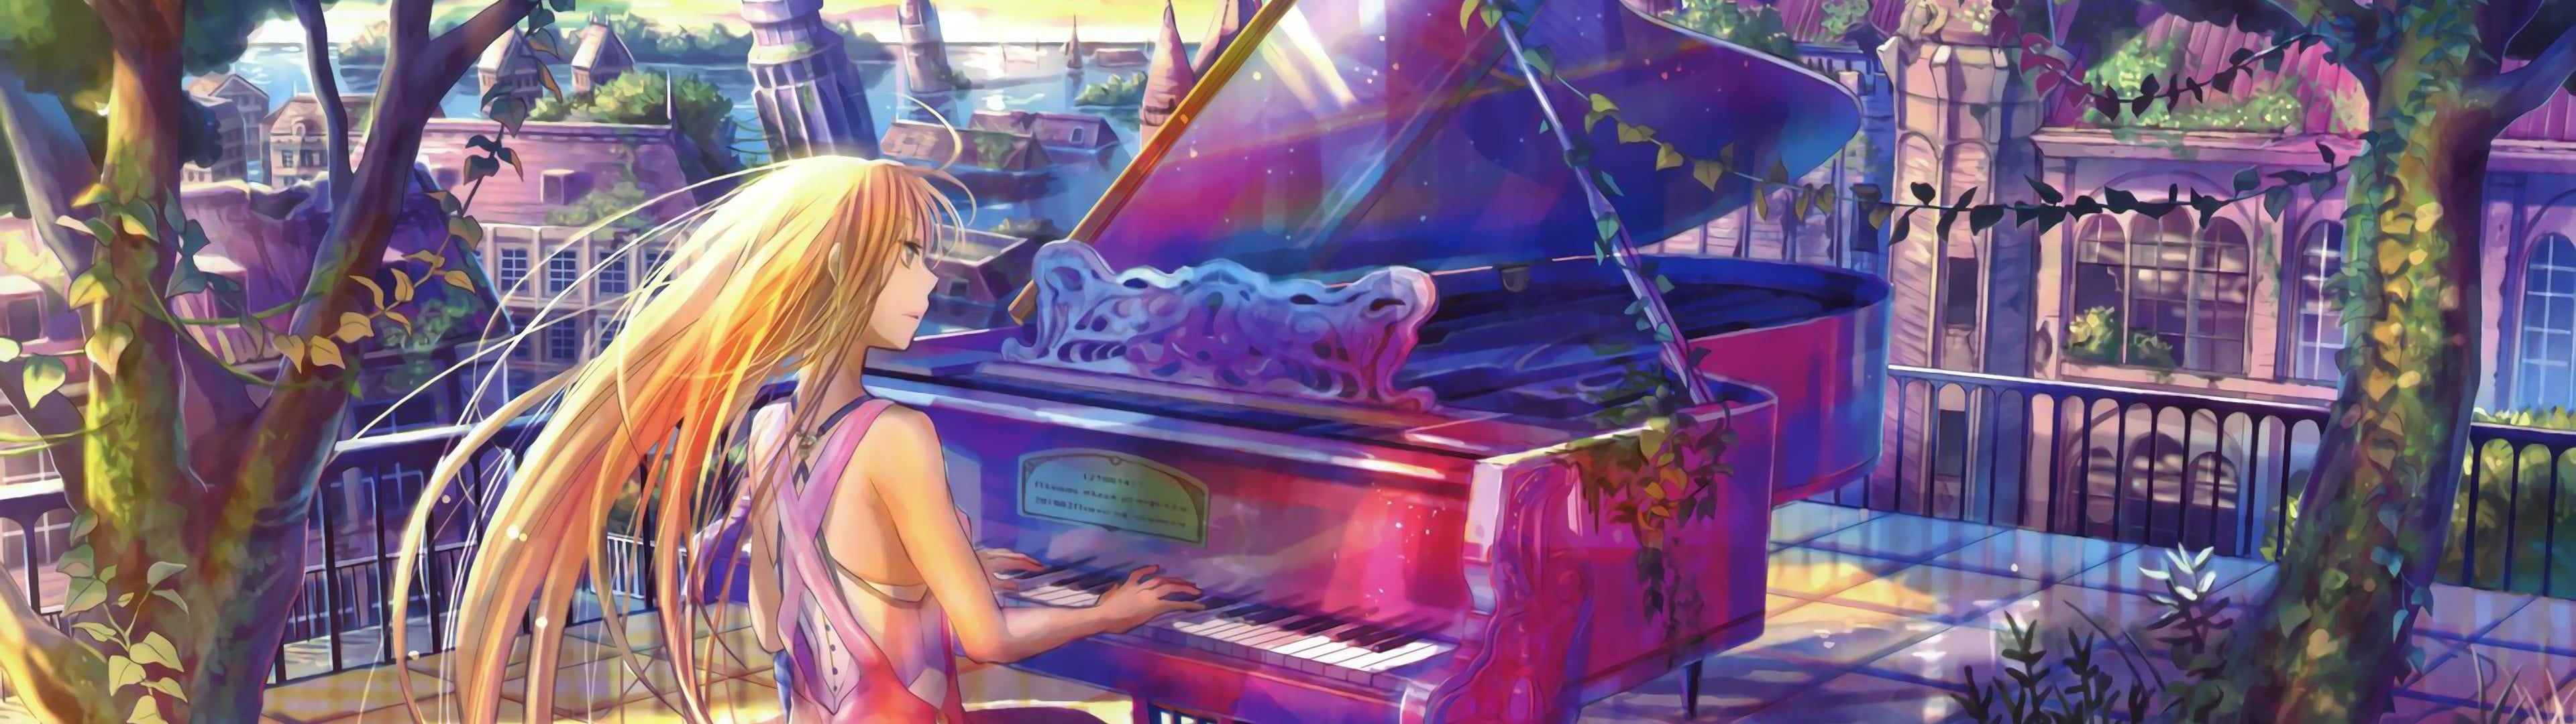 3840x1080 Female anime character with blonde hair playing the grand piano illustration HD wallpaper on WallpaperBat